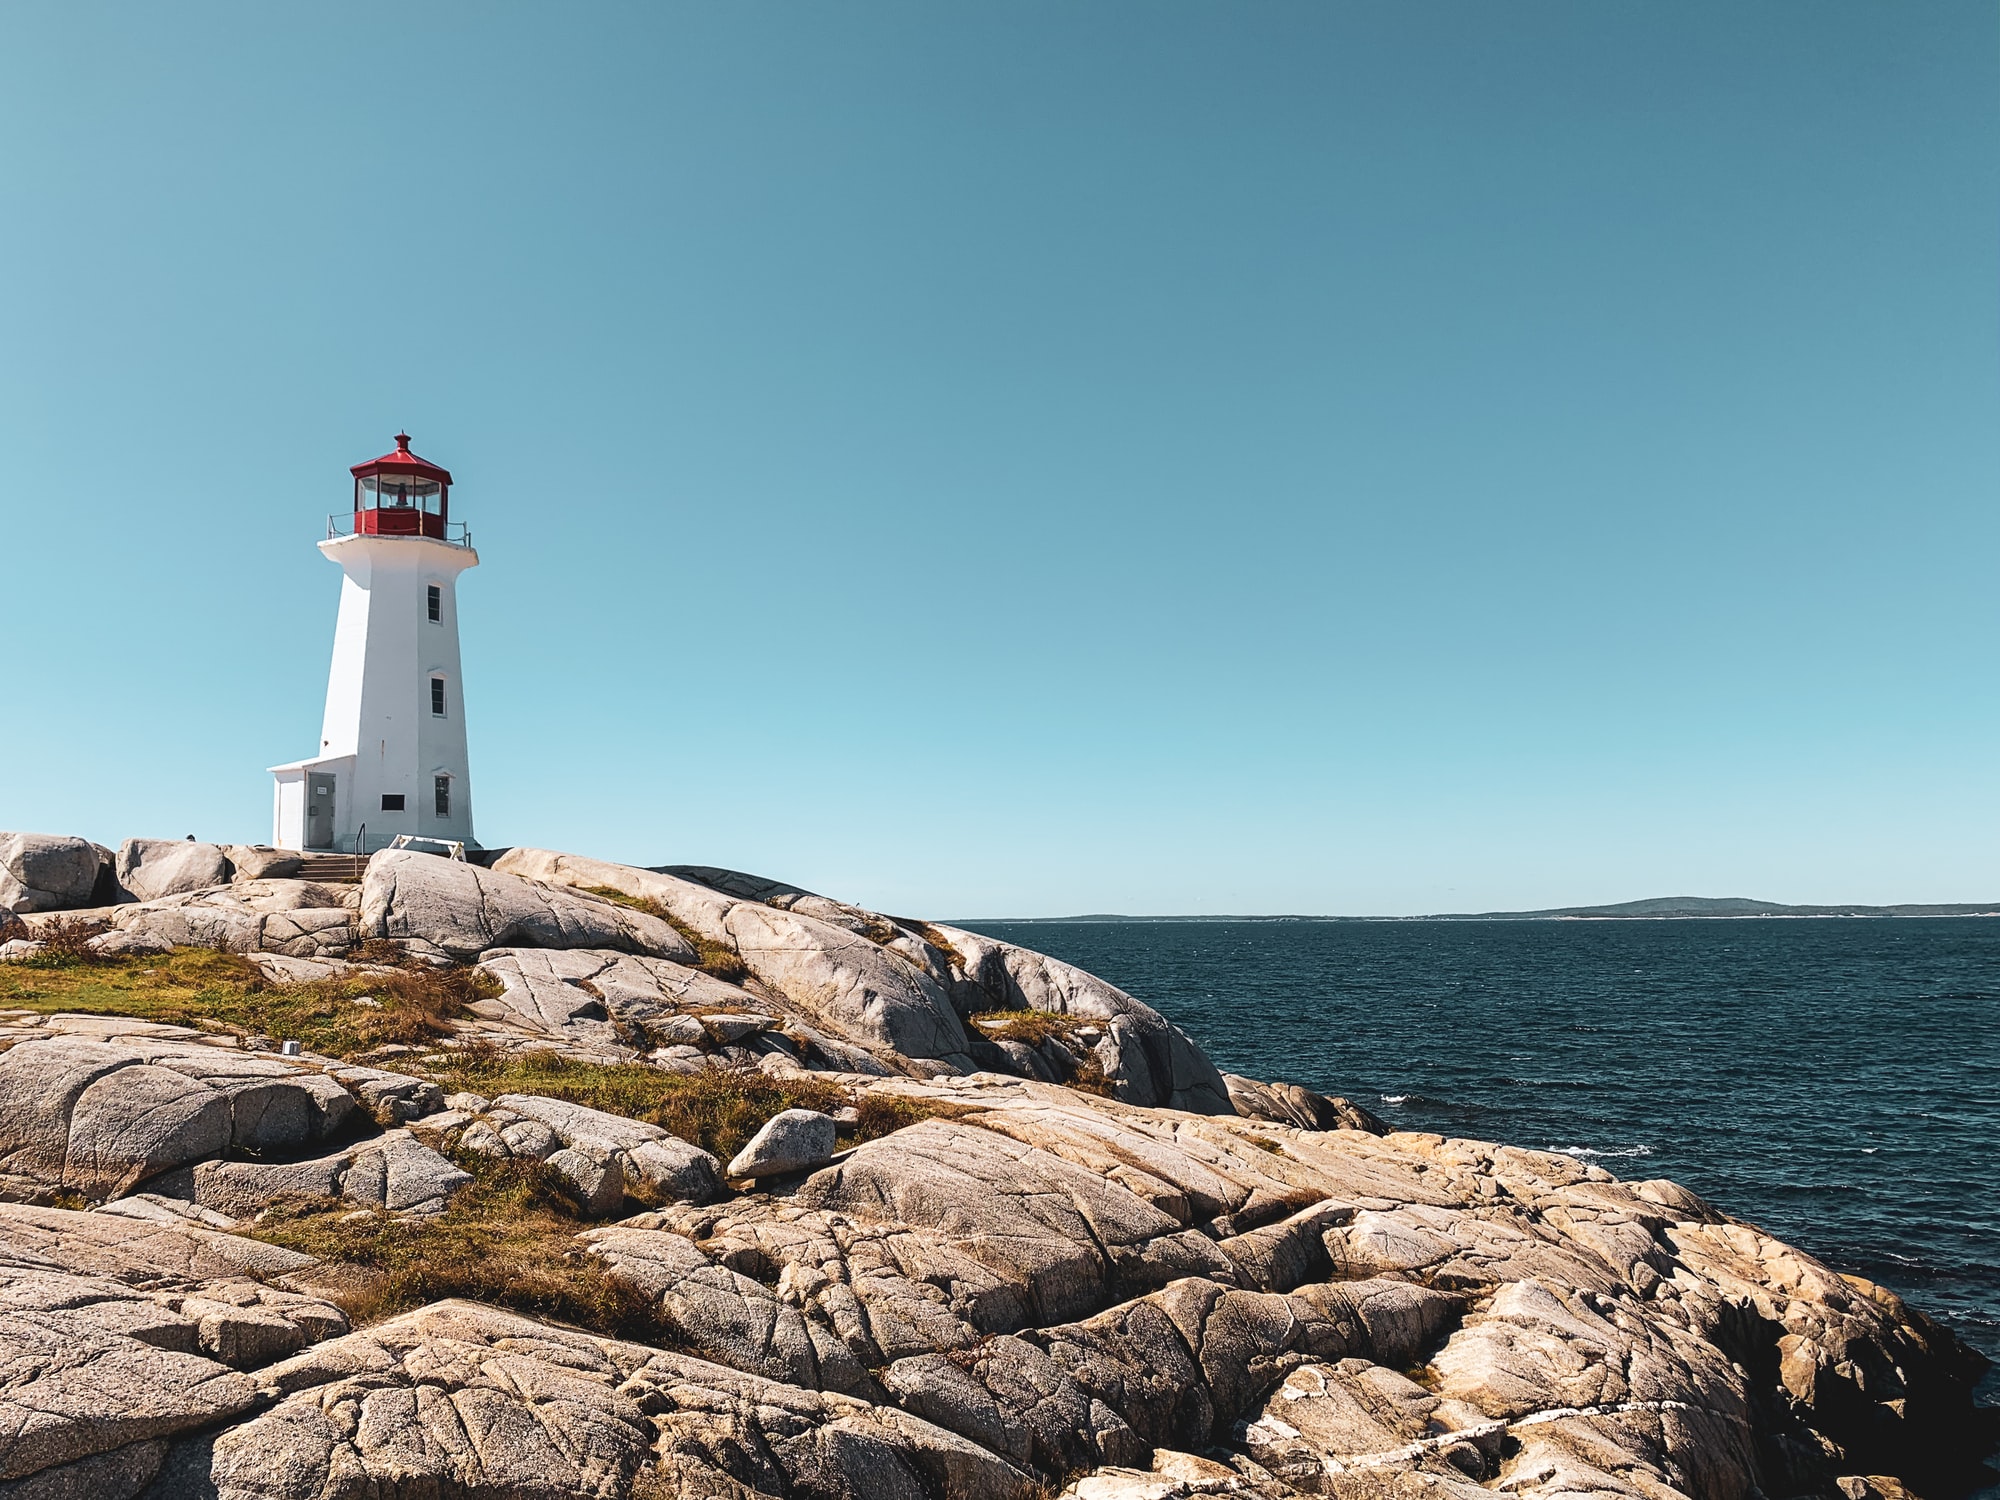 Peggy's Cove iconic lighthouse standing tall on rugged Nova Scotian coastline showcasing a beautifully serene landscape